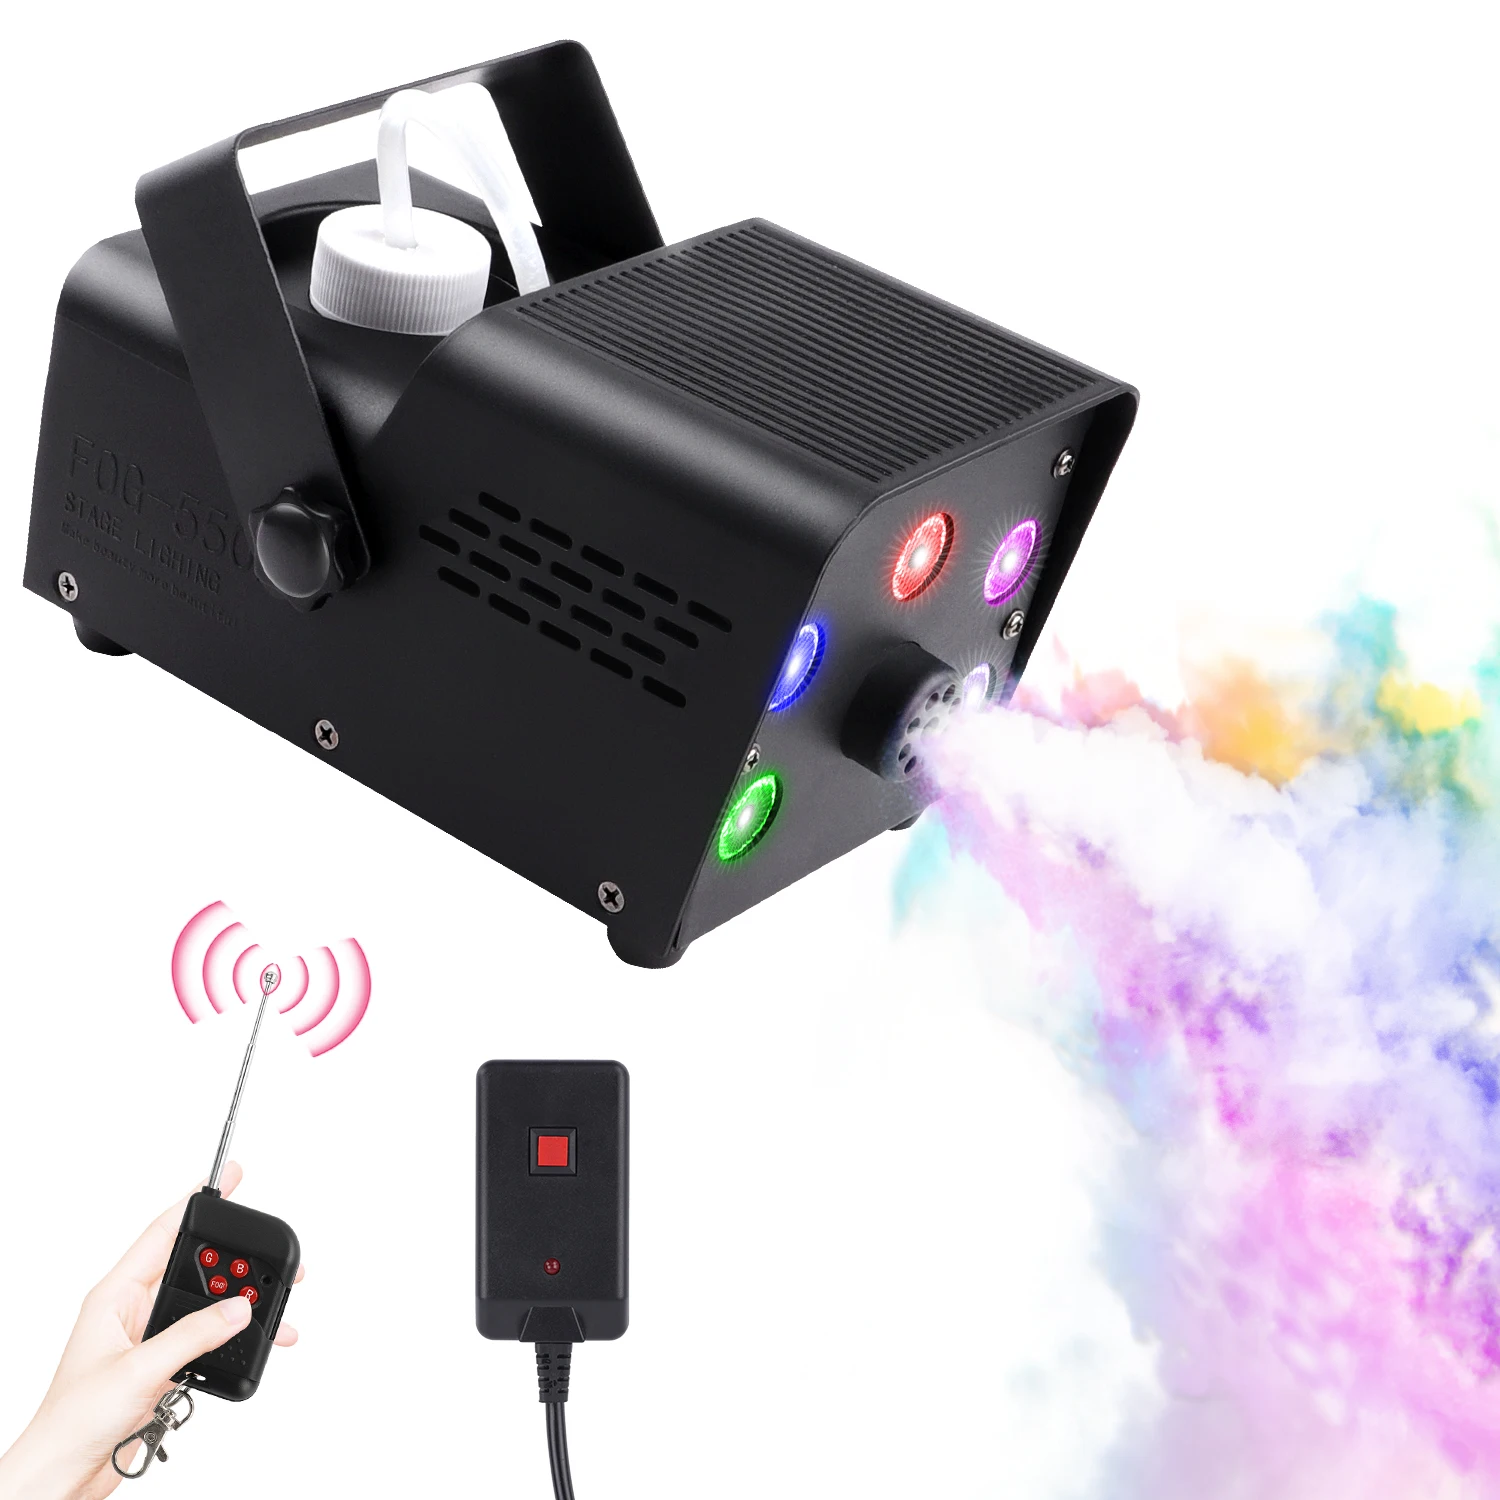 Fog Machine with LED Lights Potable Smoke Machine with Wireless Remote Controls 500w DJ Stage Fog Atmosphere Maker for Halloween Christmas Wedding Parties 